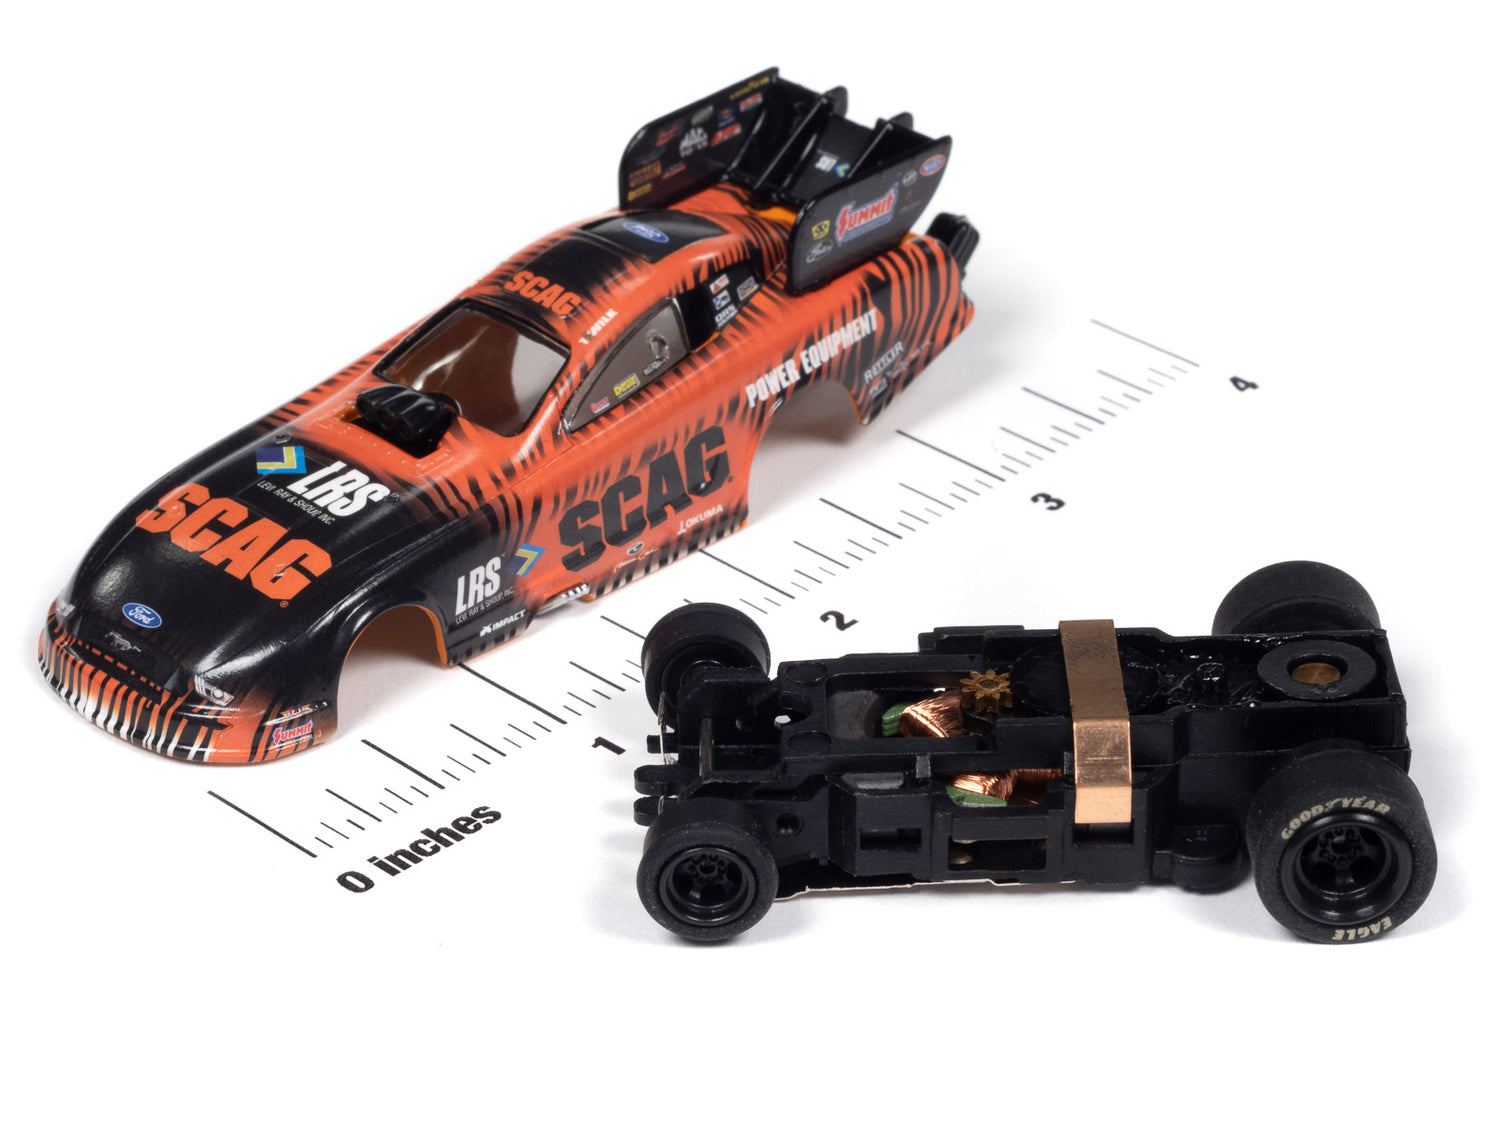 "PRE-ORDER" Auto World 4Gear Tim Wilkerson SCAG Power Equipment 2023 Ford Mustang Funny Car HO Scale Slot Car (DUE JUNE 2024)